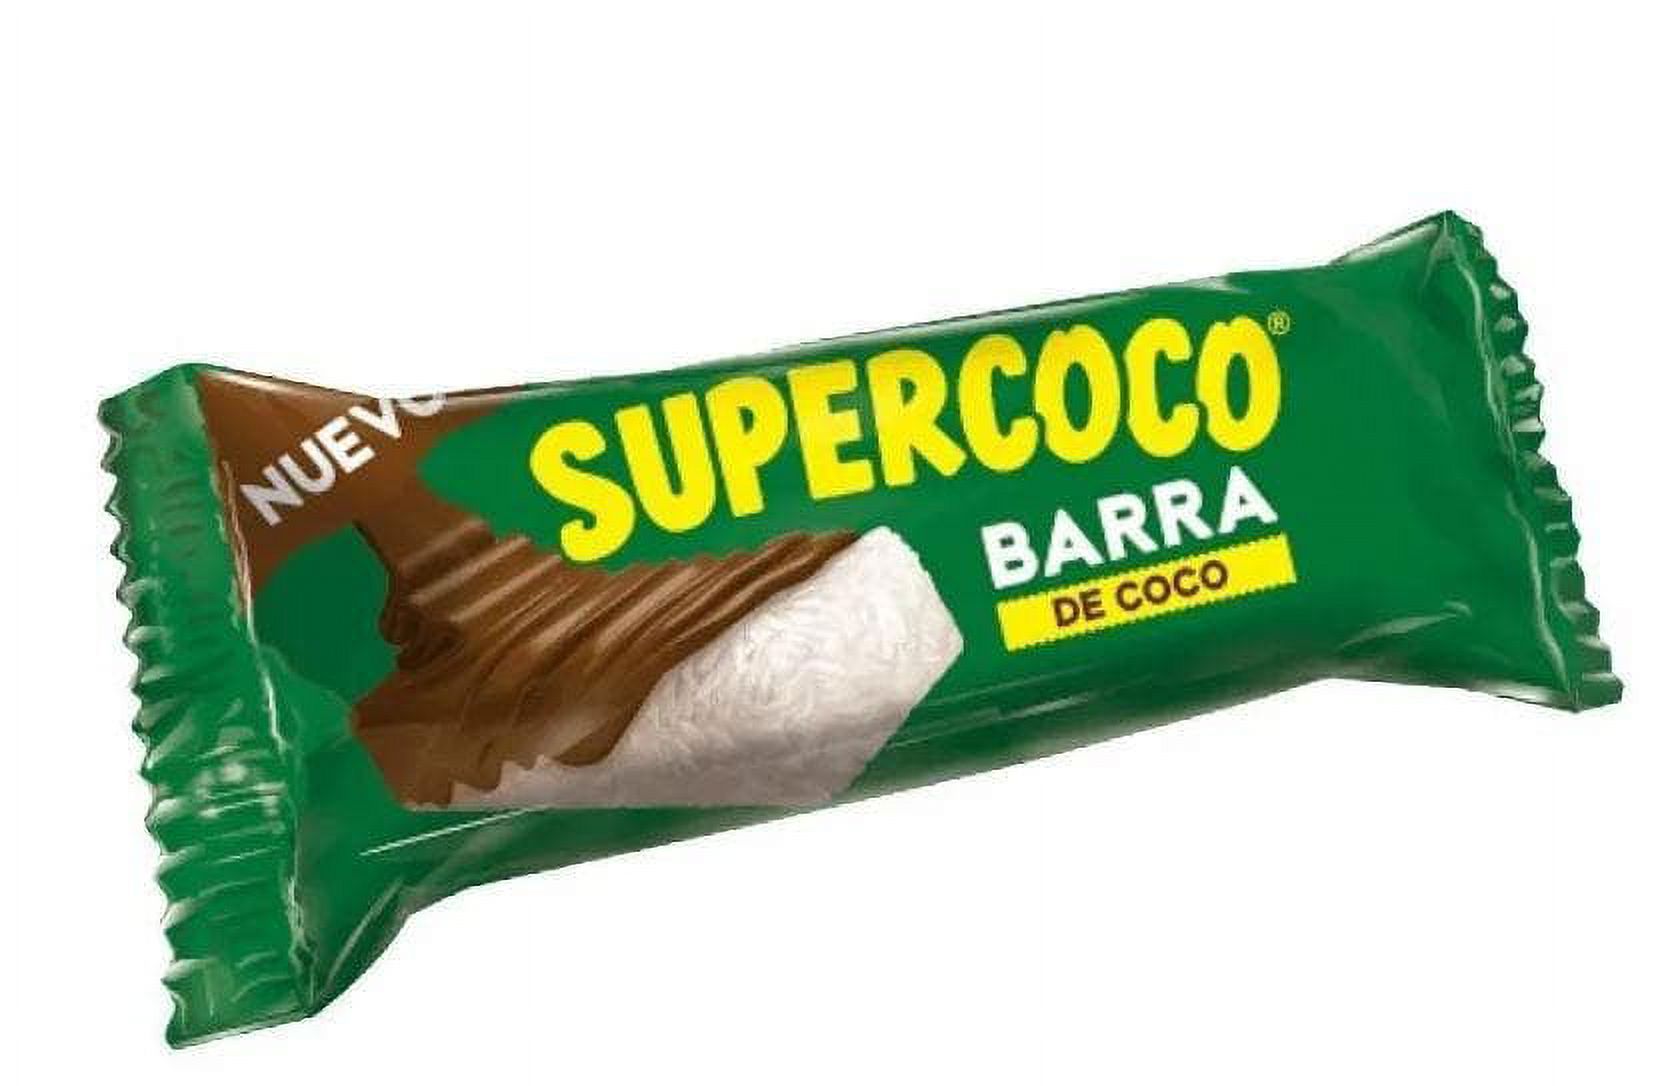 Supercoco Snack In Bar (Pck of 3 - 12 count per pack) Coconut bar covered in dark chocolate Dulce Colombiano Colombia snack colombian food comida colombiana - image 2 of 4